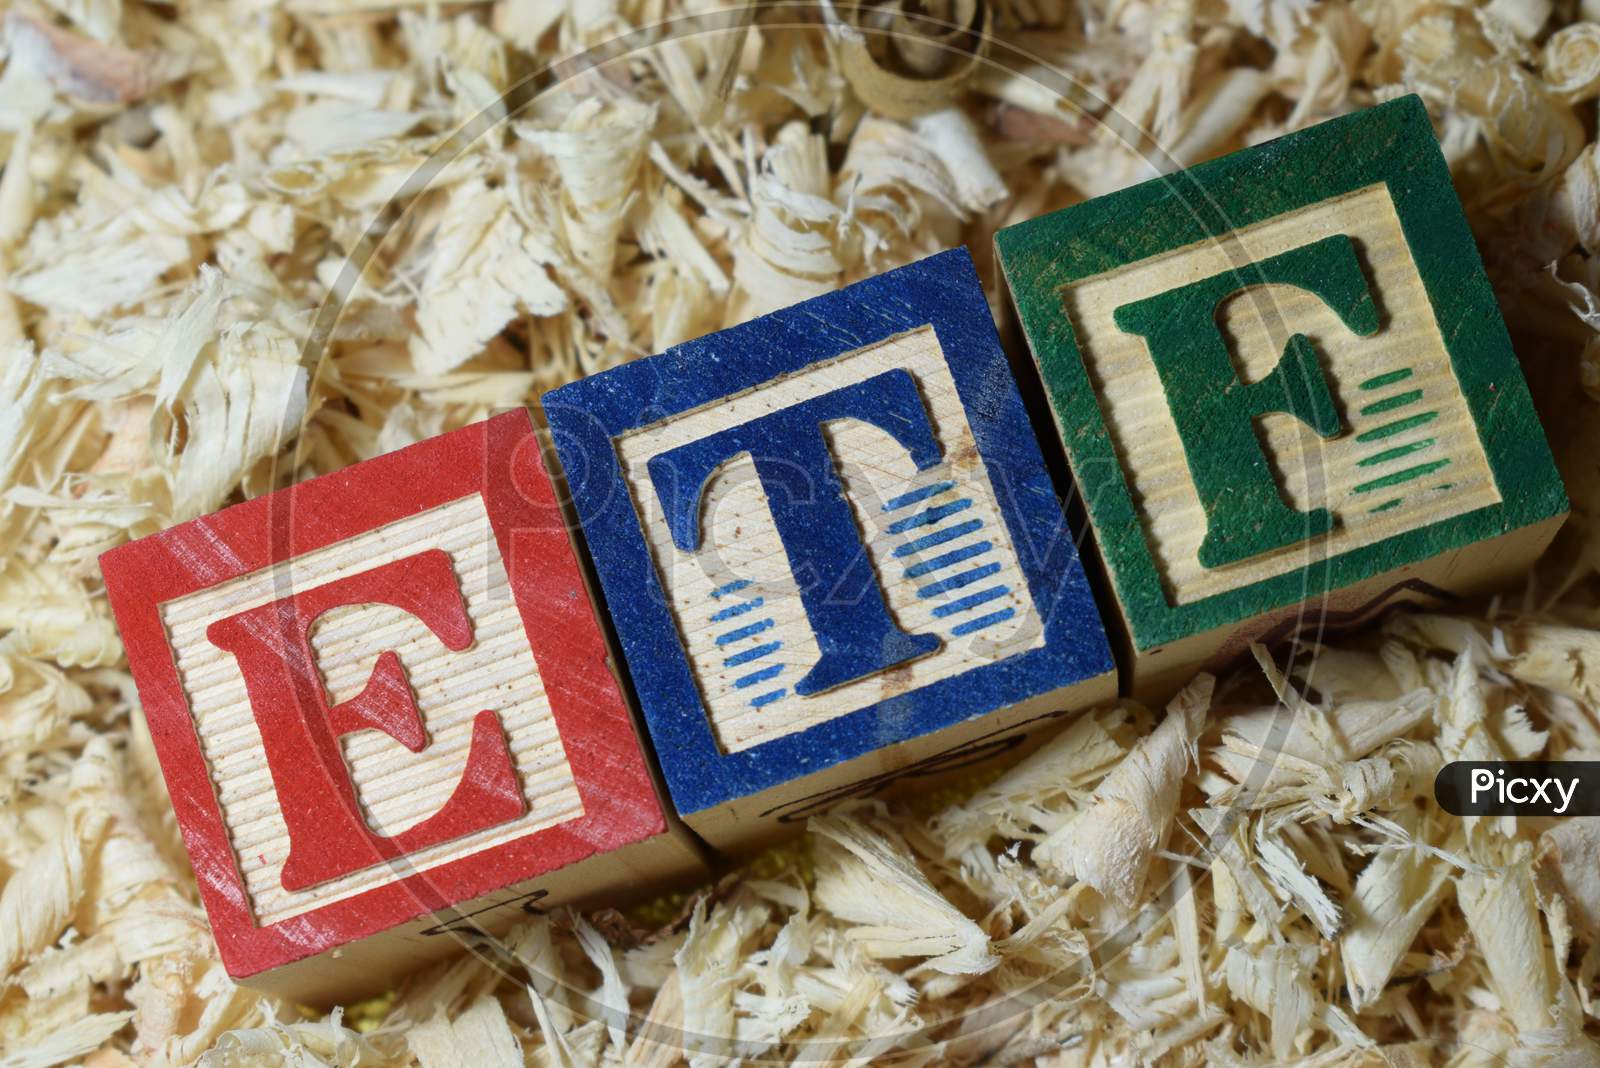 Etf Text Arranged With Wooden Block